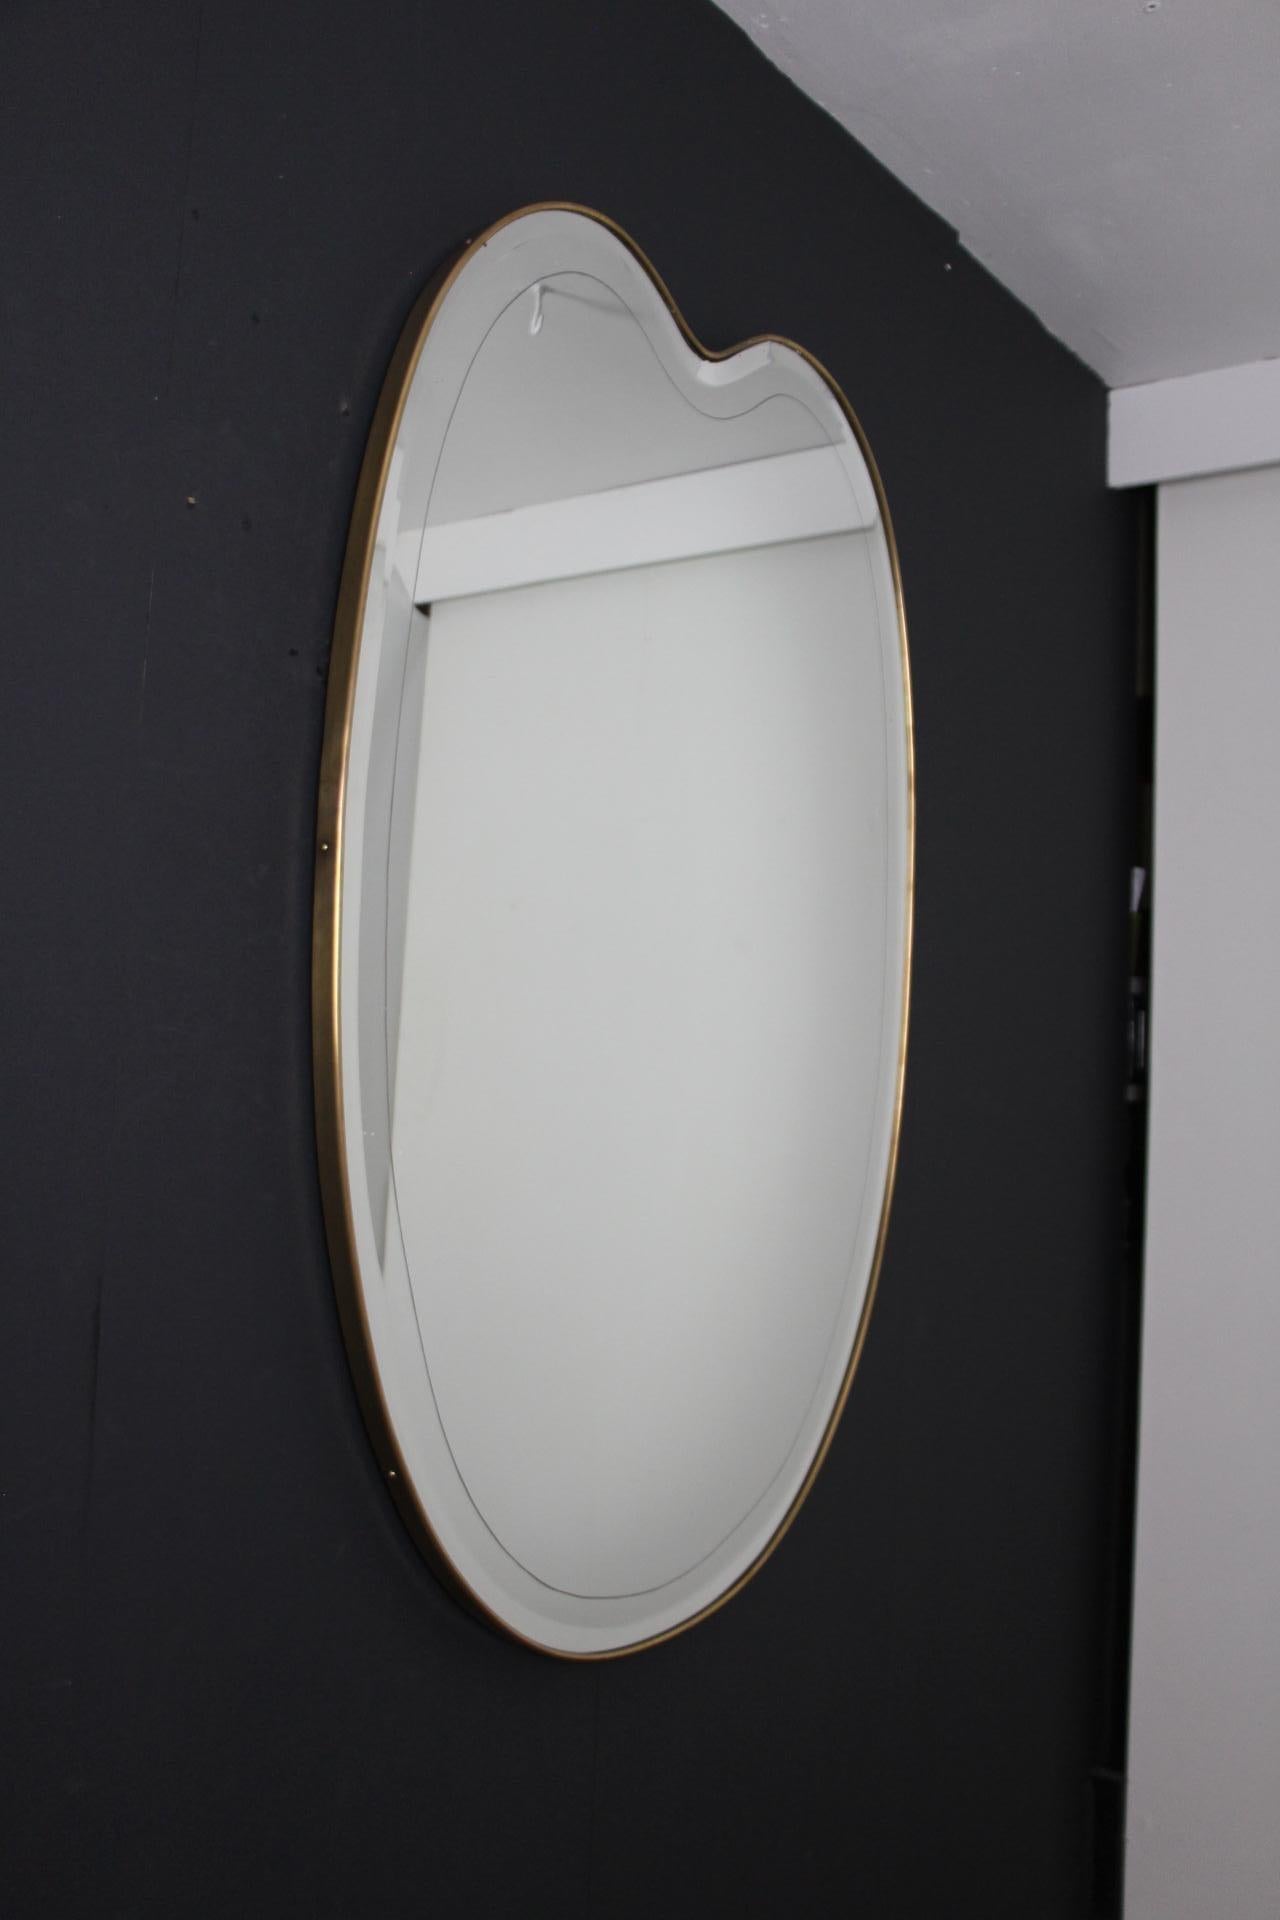 Mid-Century Modern Large 1950's Modernist Shaped Brass Wall Mirror, Heart Shaped, Gio Ponti Style For Sale